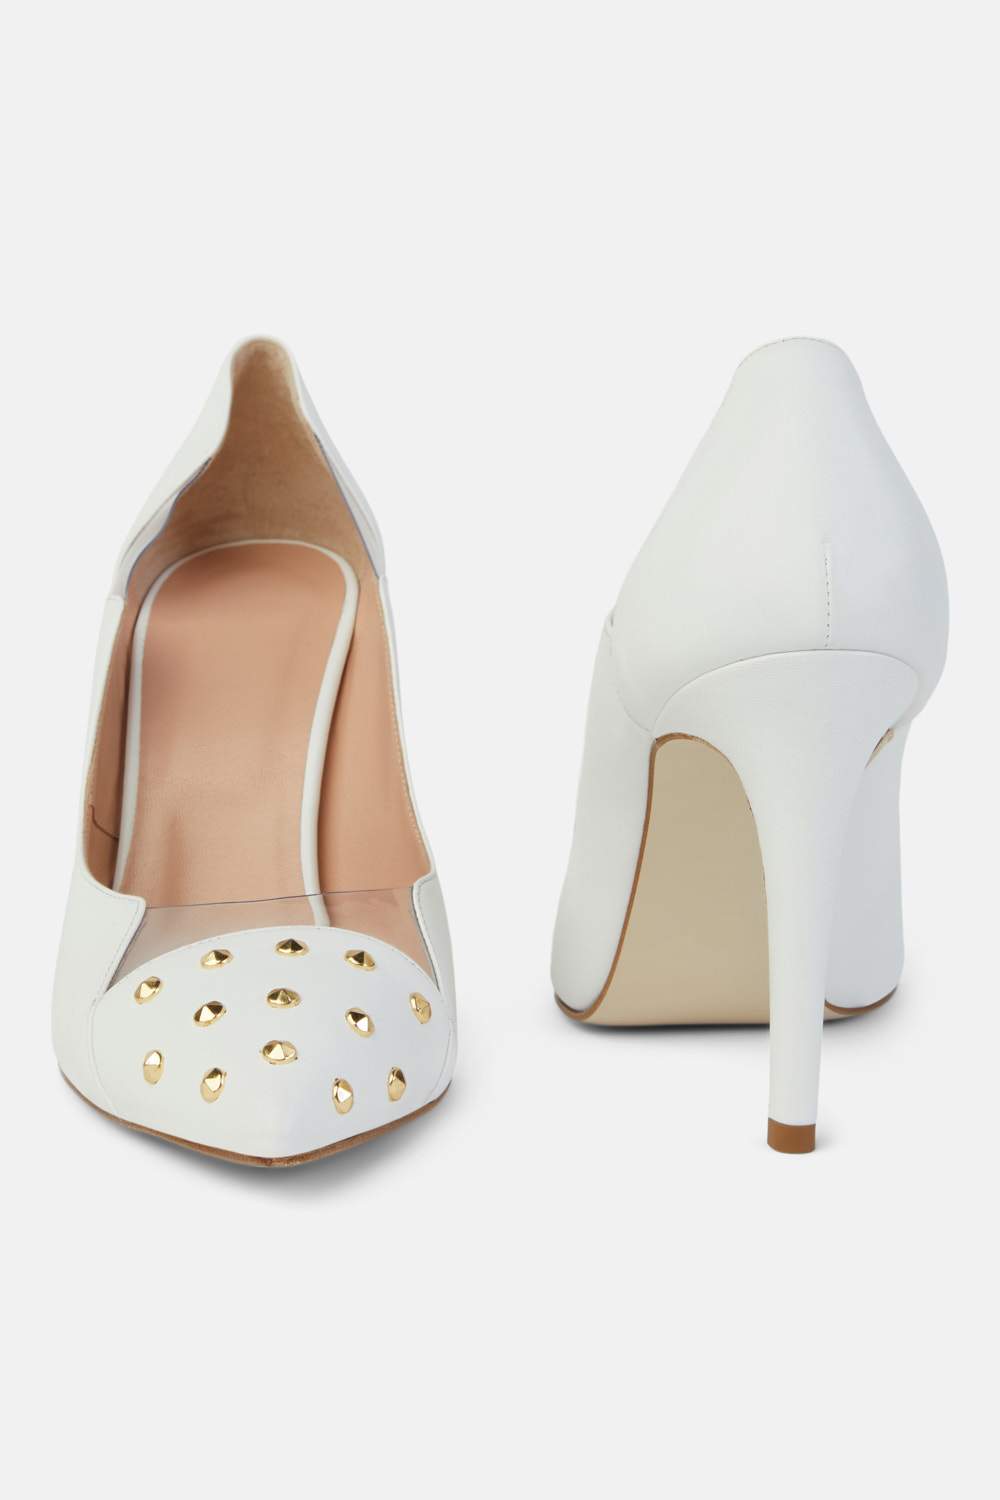 Danilo di Lea by Roselina SHOES Bianca Gold Studded White Leather Heels